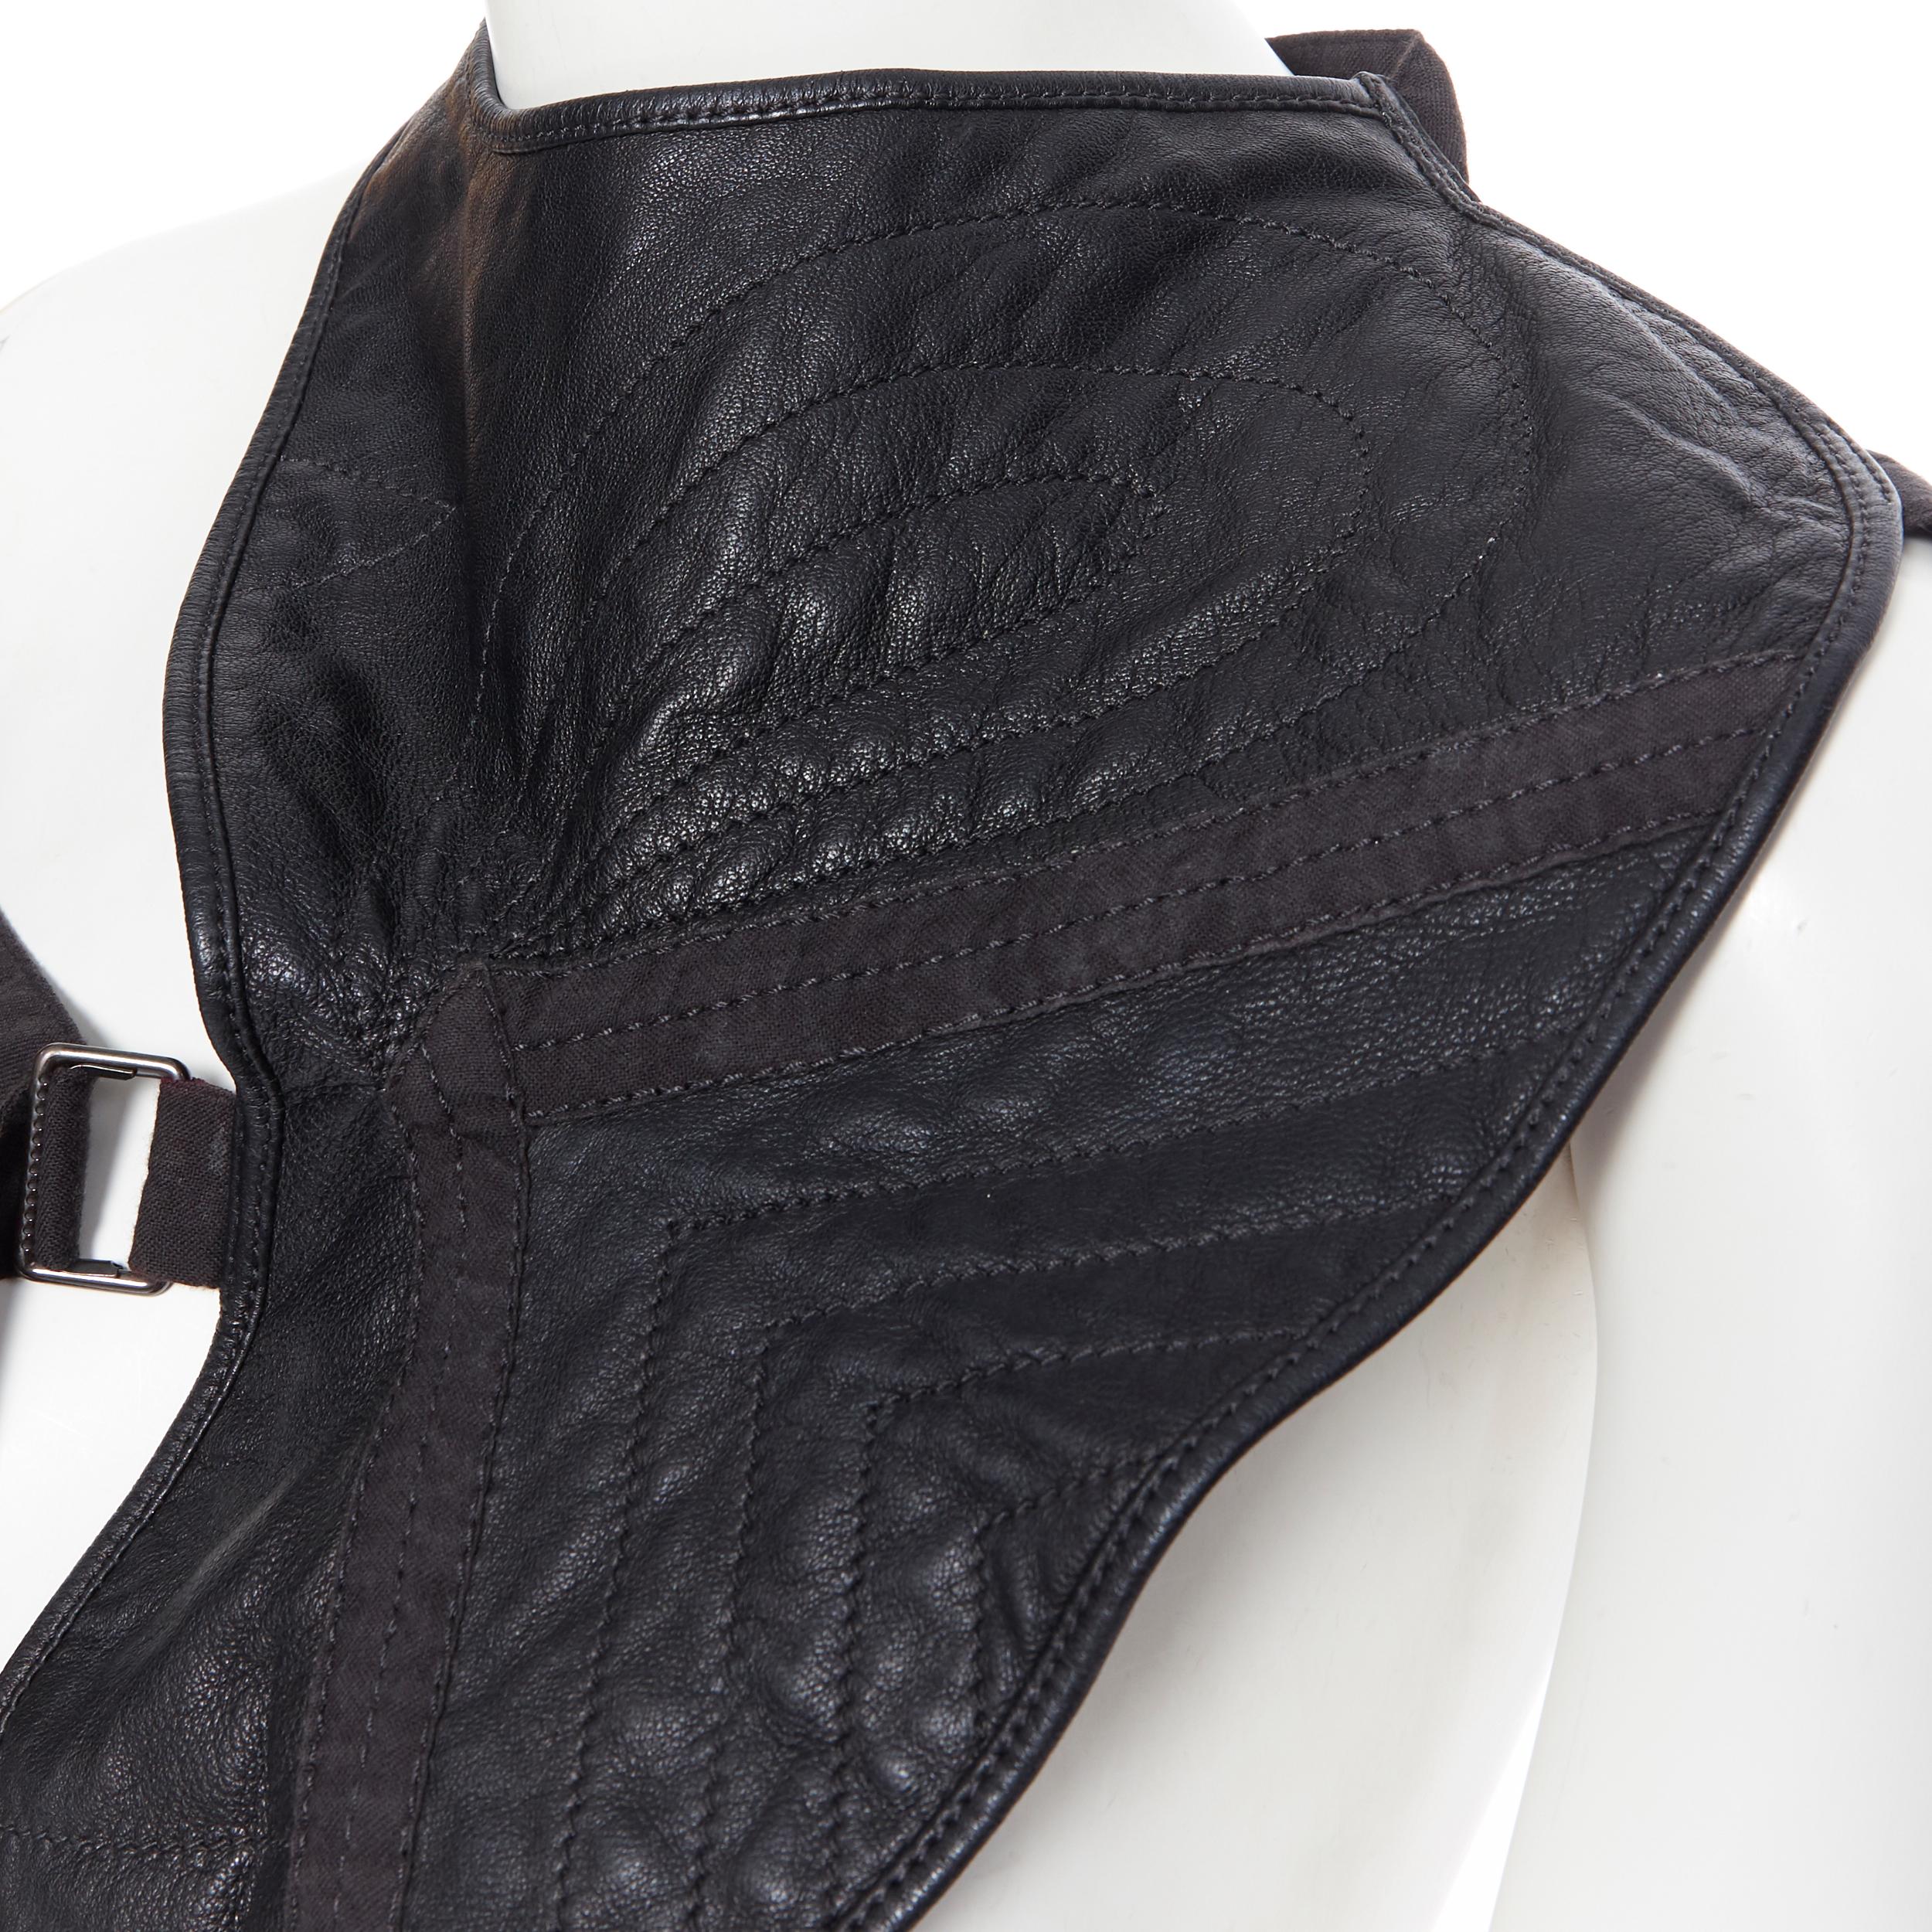 ANN DEMEULEMEESTER black contour stitched strapped harness leather piece top S
Brand: Ann Demeulemeester
Designer: Ann Demeulemeester
Model Name / Style: Leather harness
Material: Leather
Color: Black
Pattern: Solid
Closure: Buckle
Extra Detail: